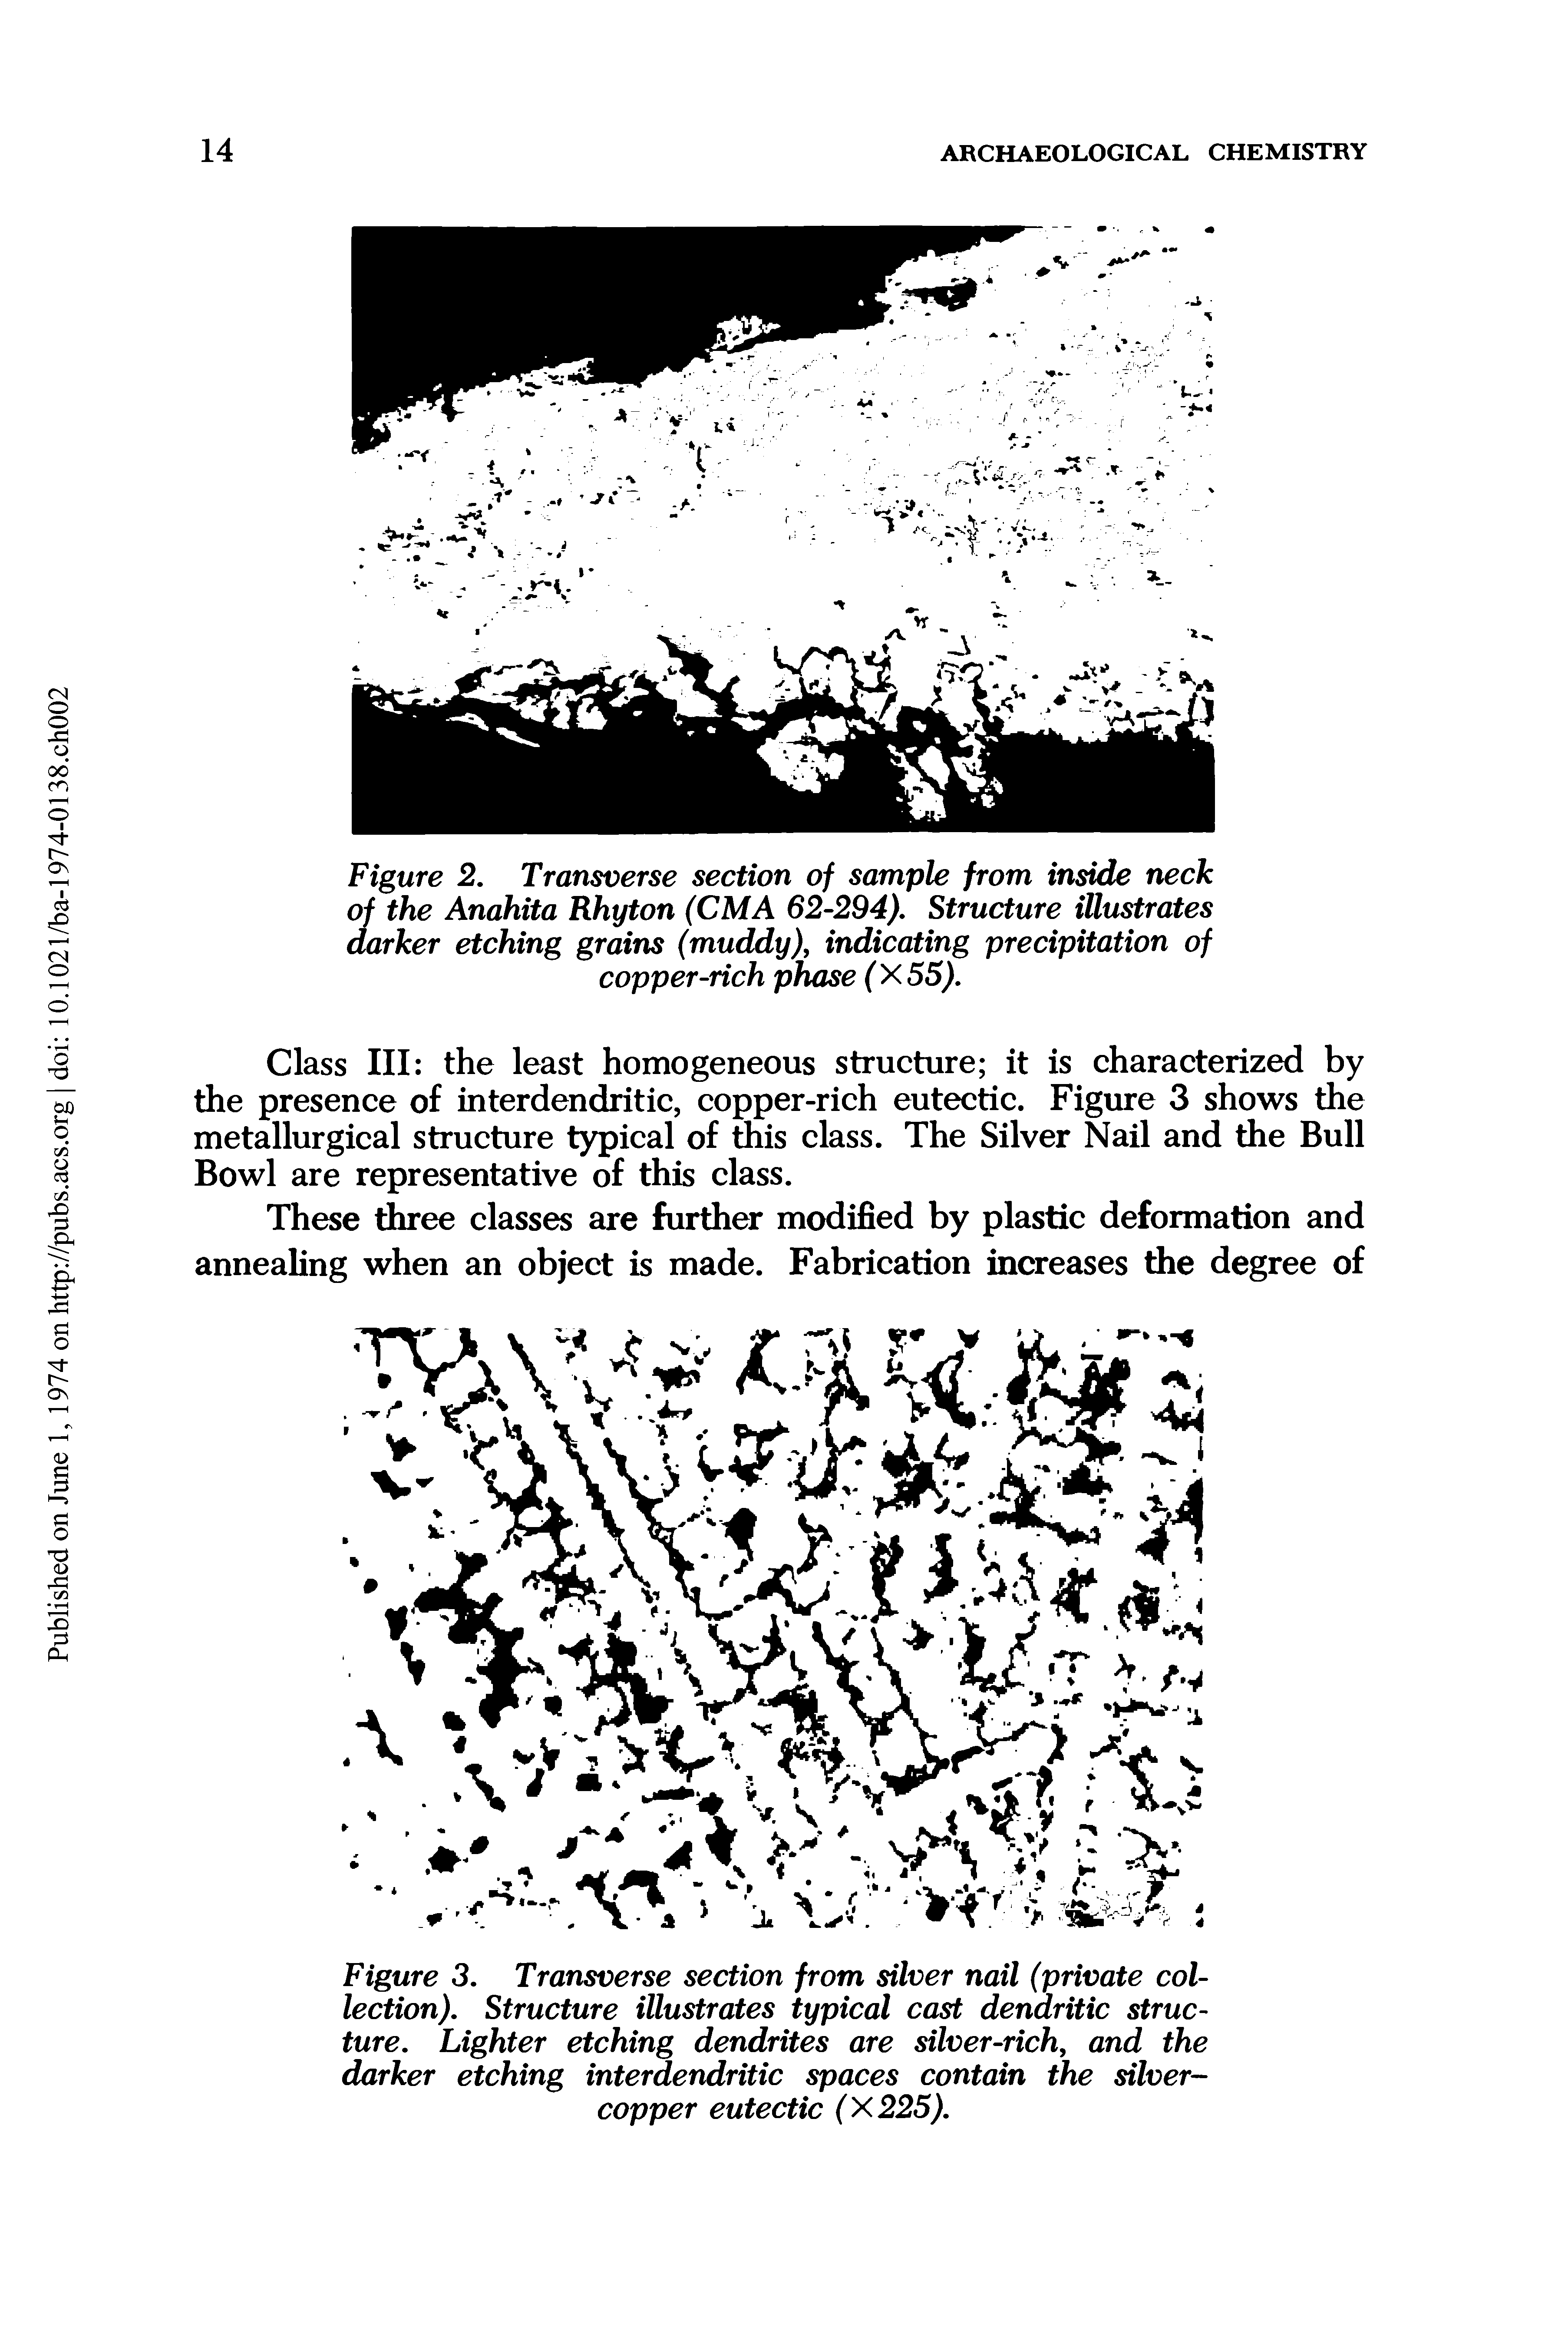 Figure 2. Transverse section of sample from inside neck of the Anahita Rhyton (CM A 62-294). Structure illustrates darker etching grains (muddy), indicating precipitation of copper-rich phase (X55).